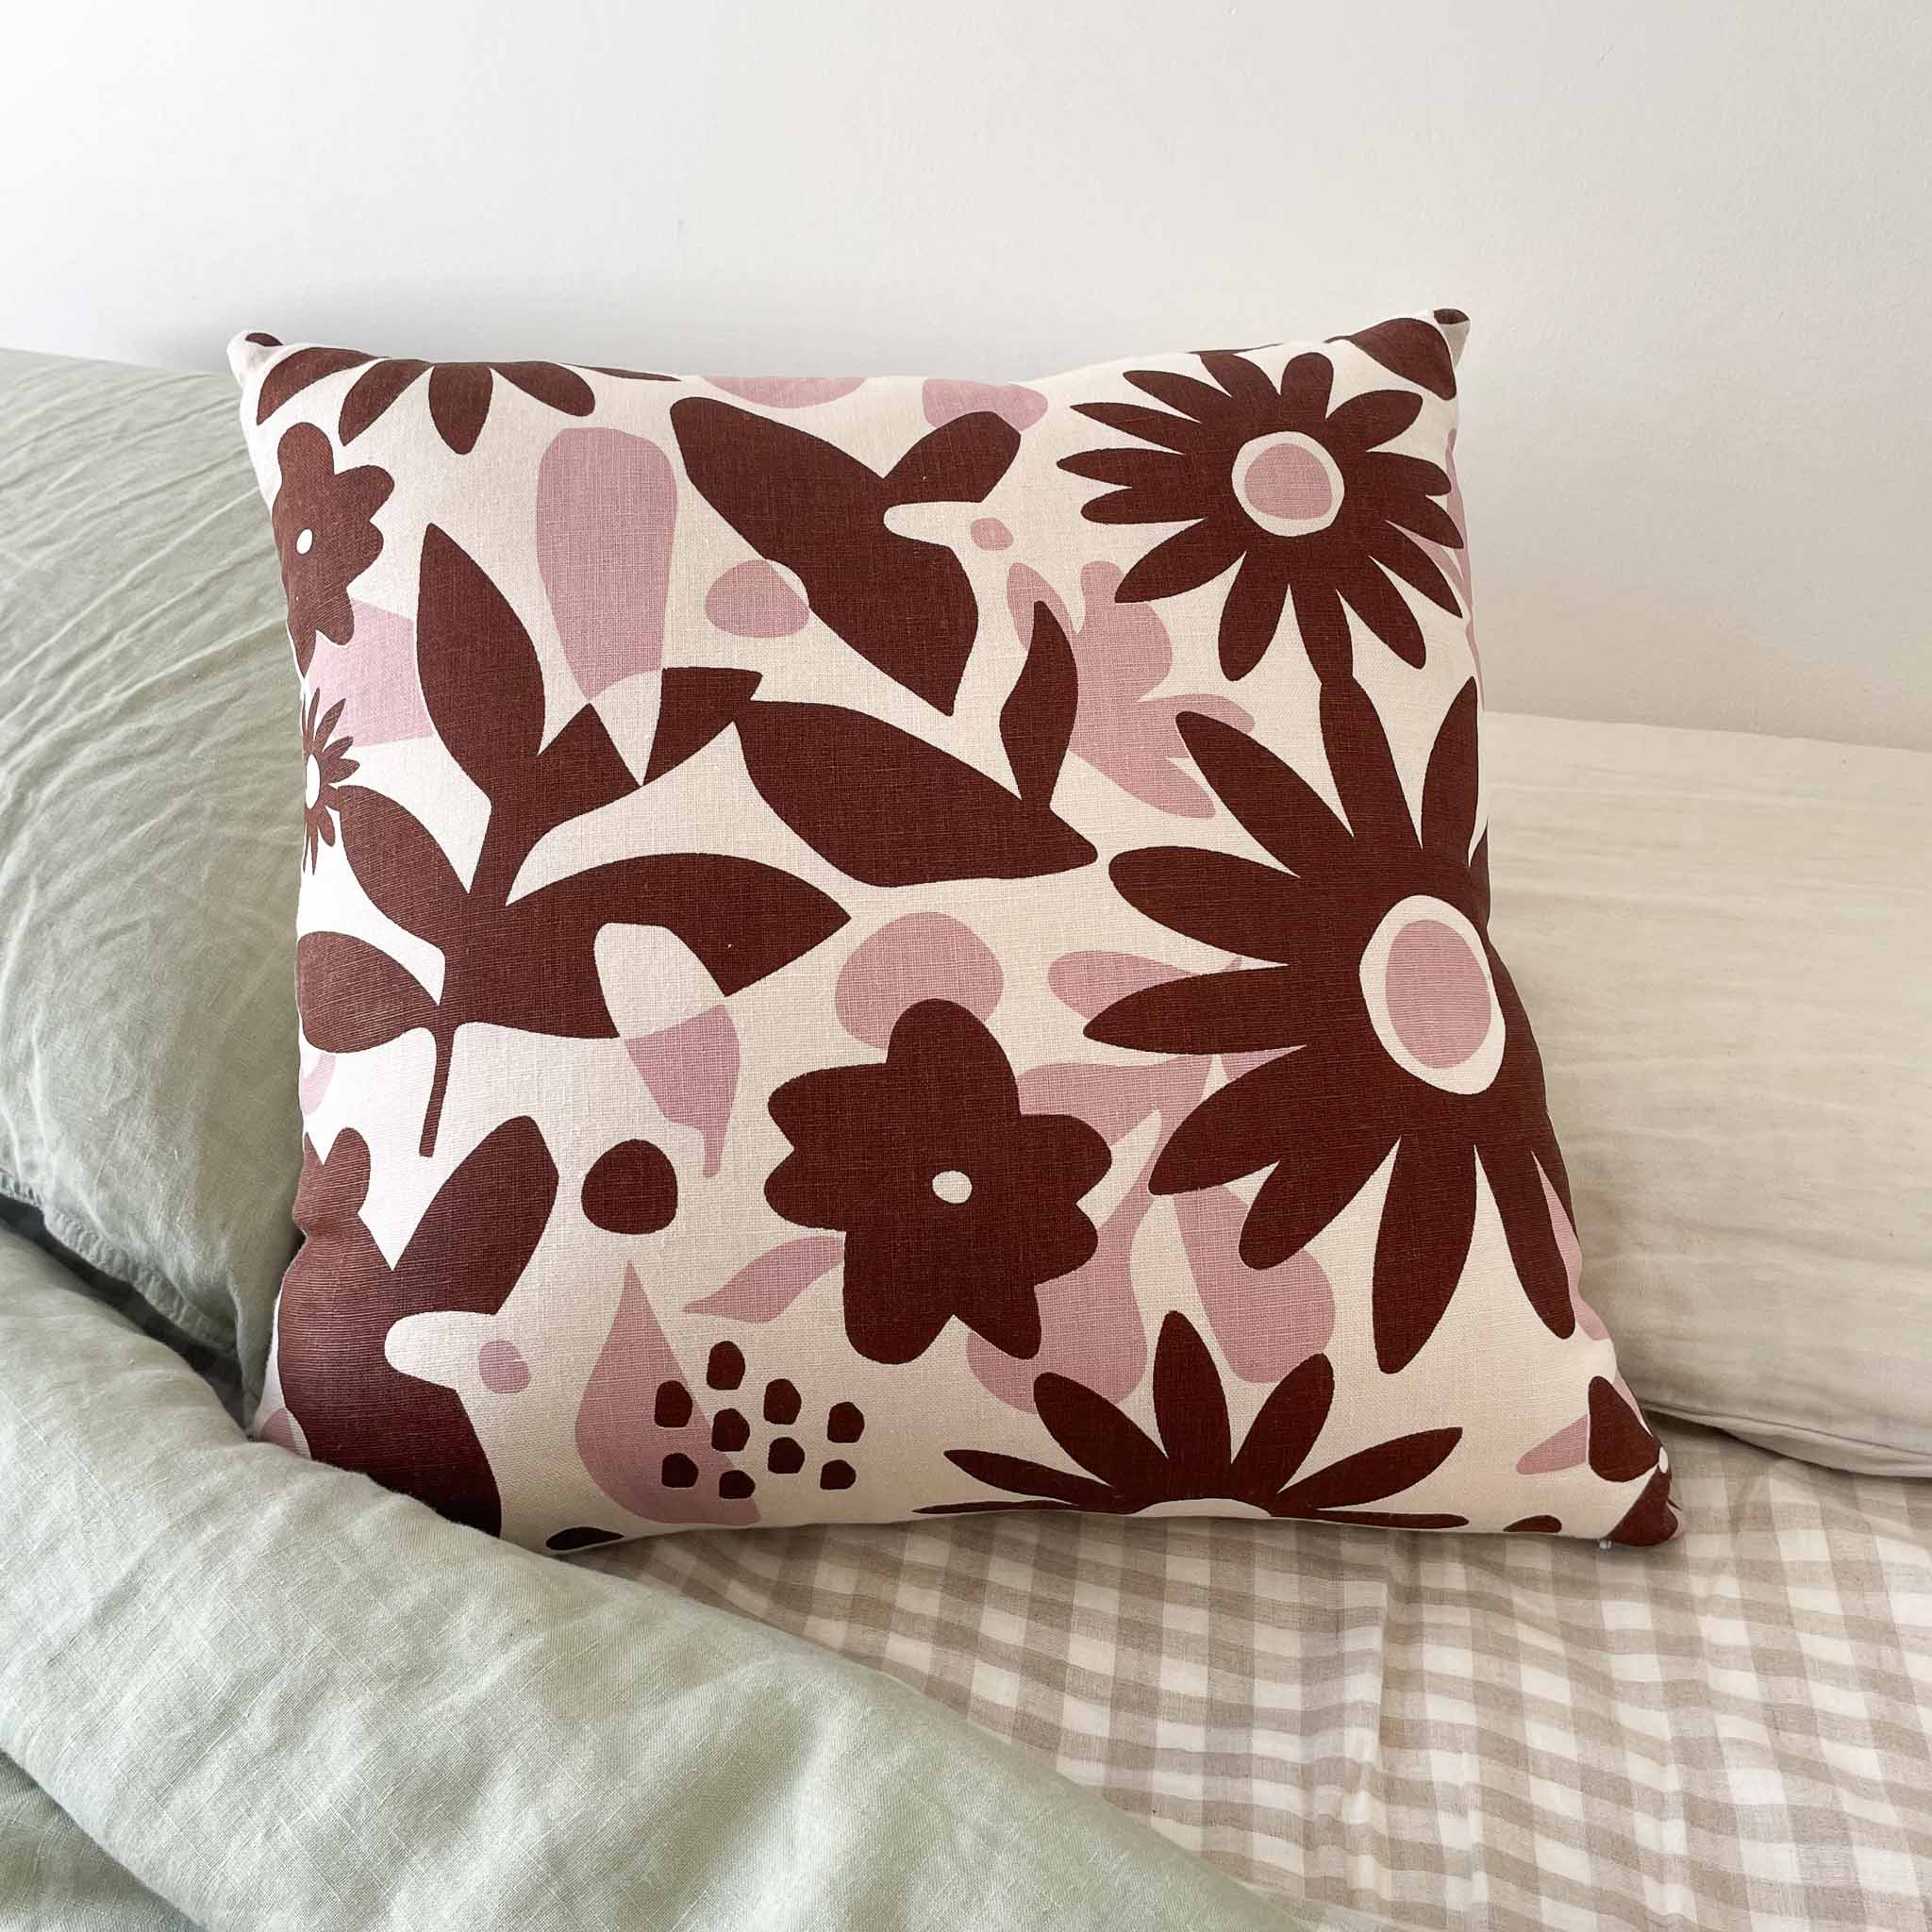 Cushion Cover - Abstract Floral In Dusty Pink and Chocolate